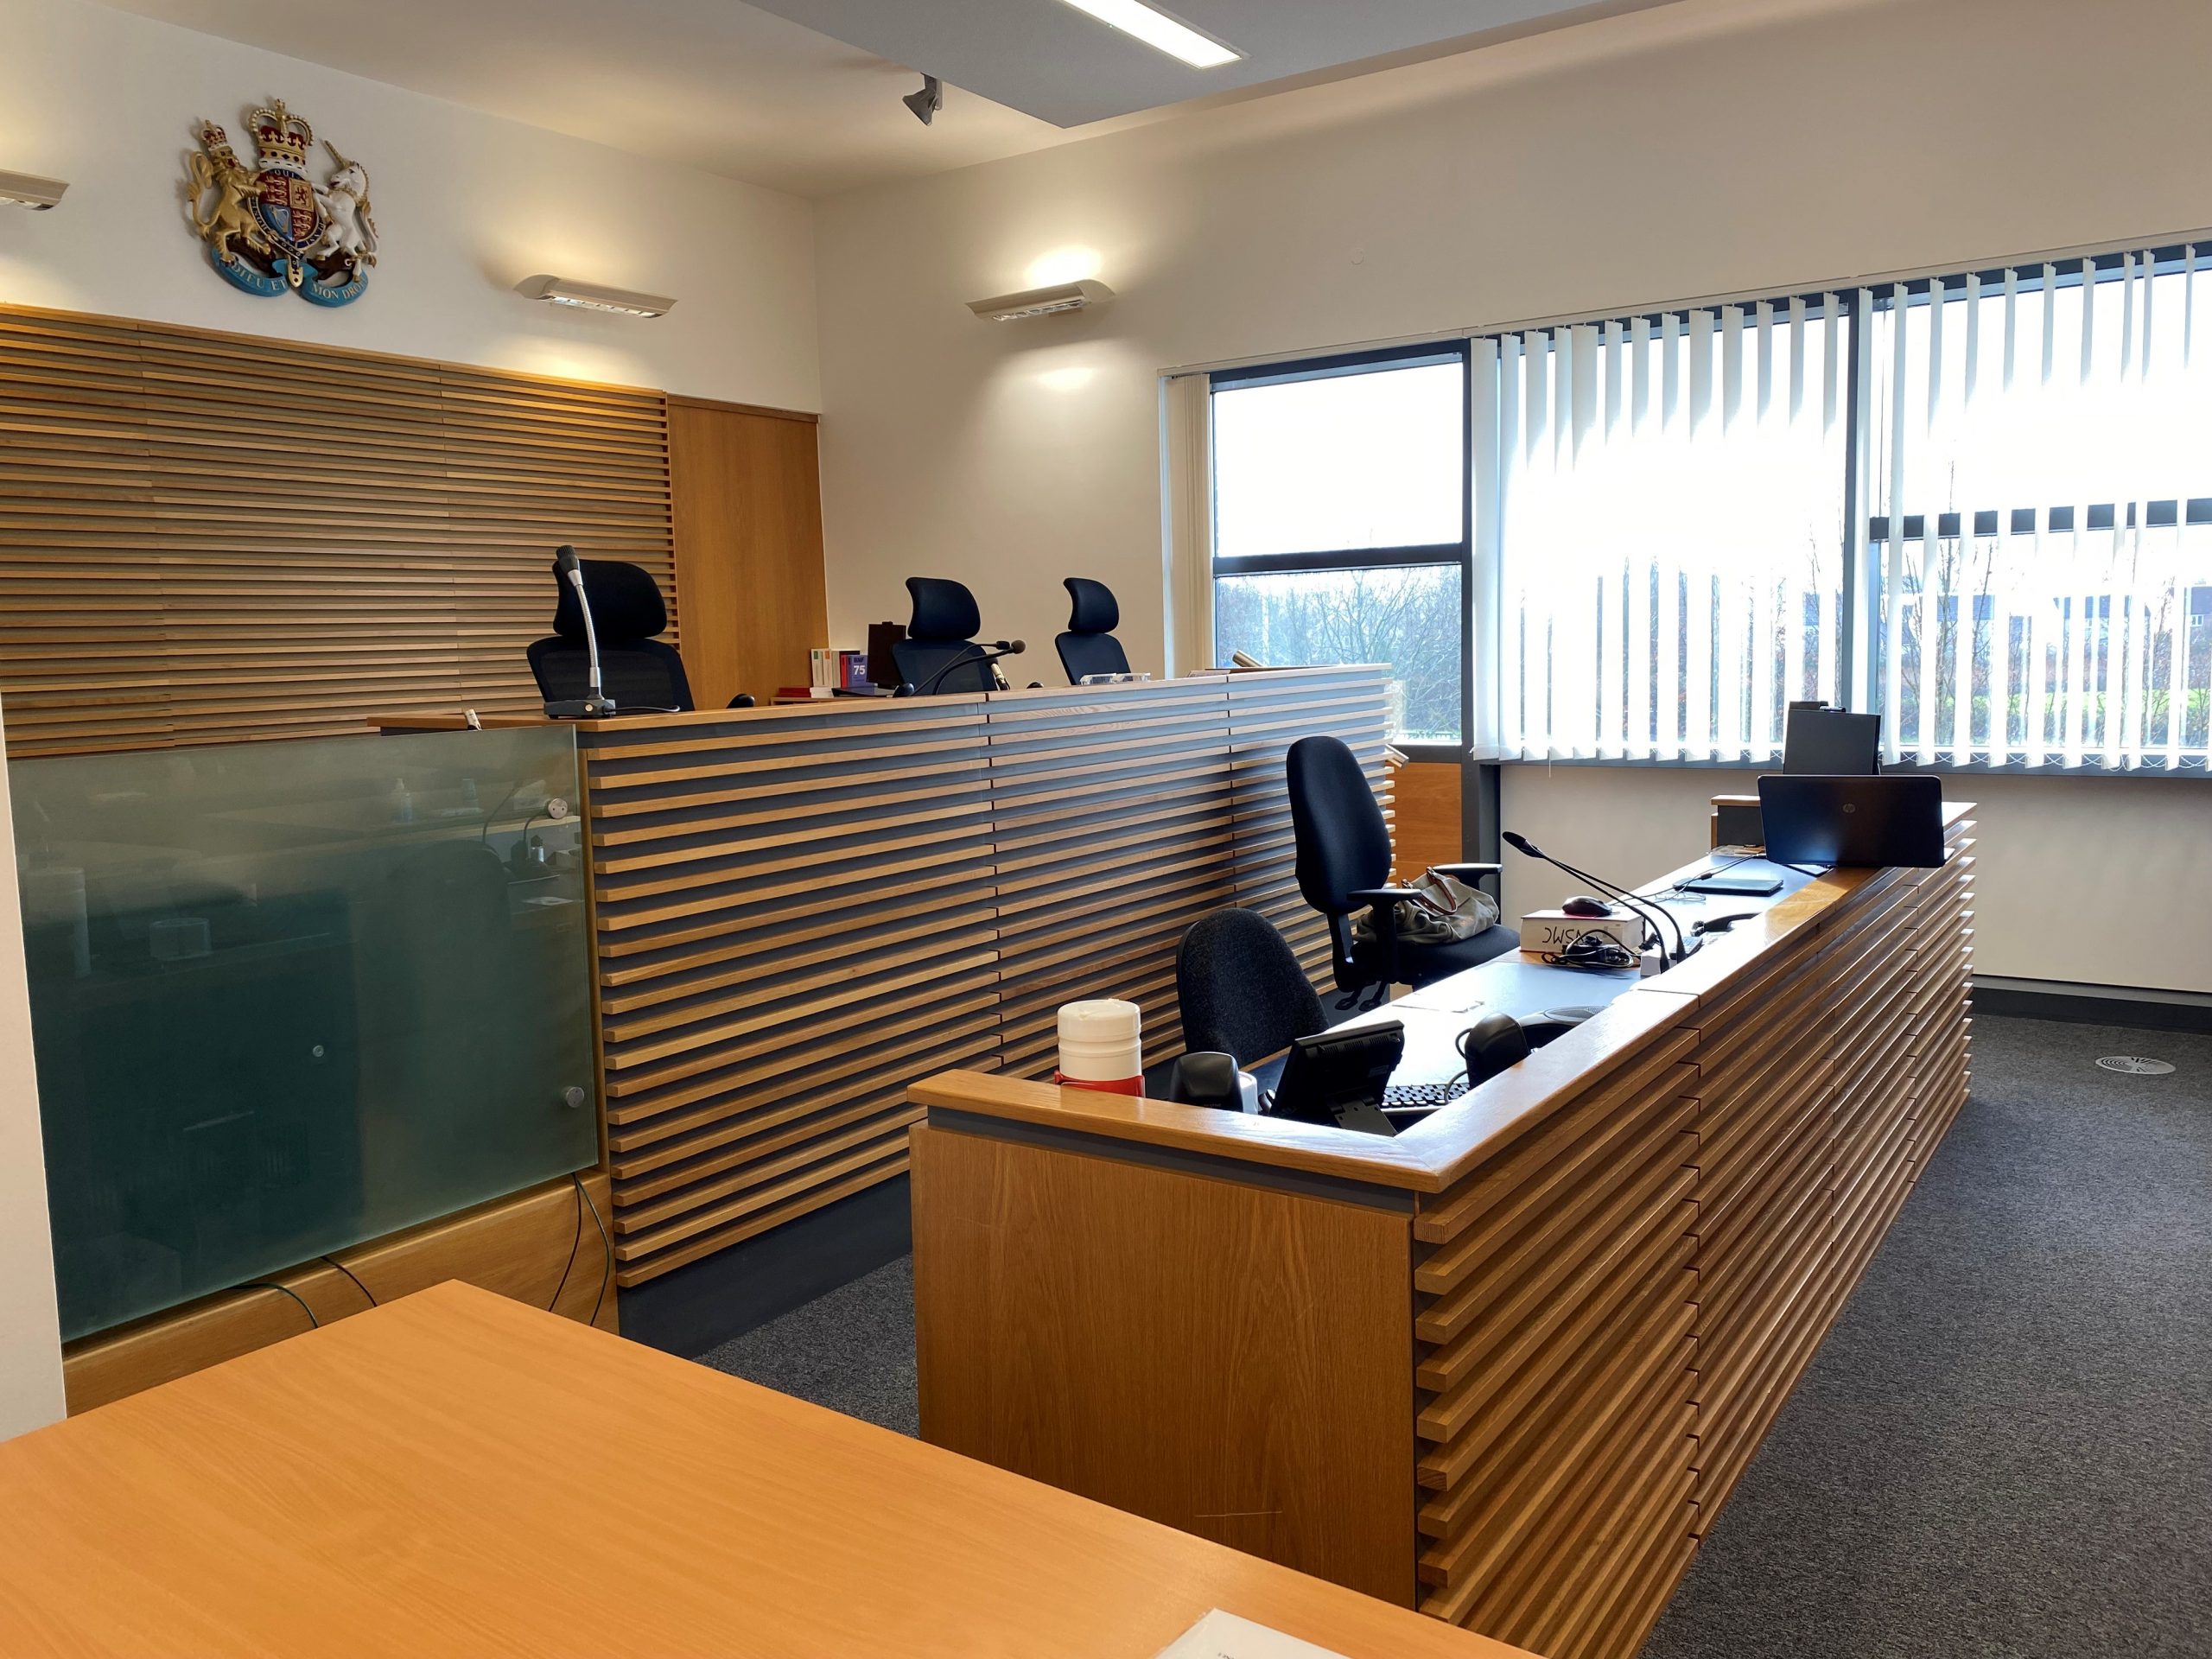 North Somerset Magistrates Court during Uniformed and Public Services trip